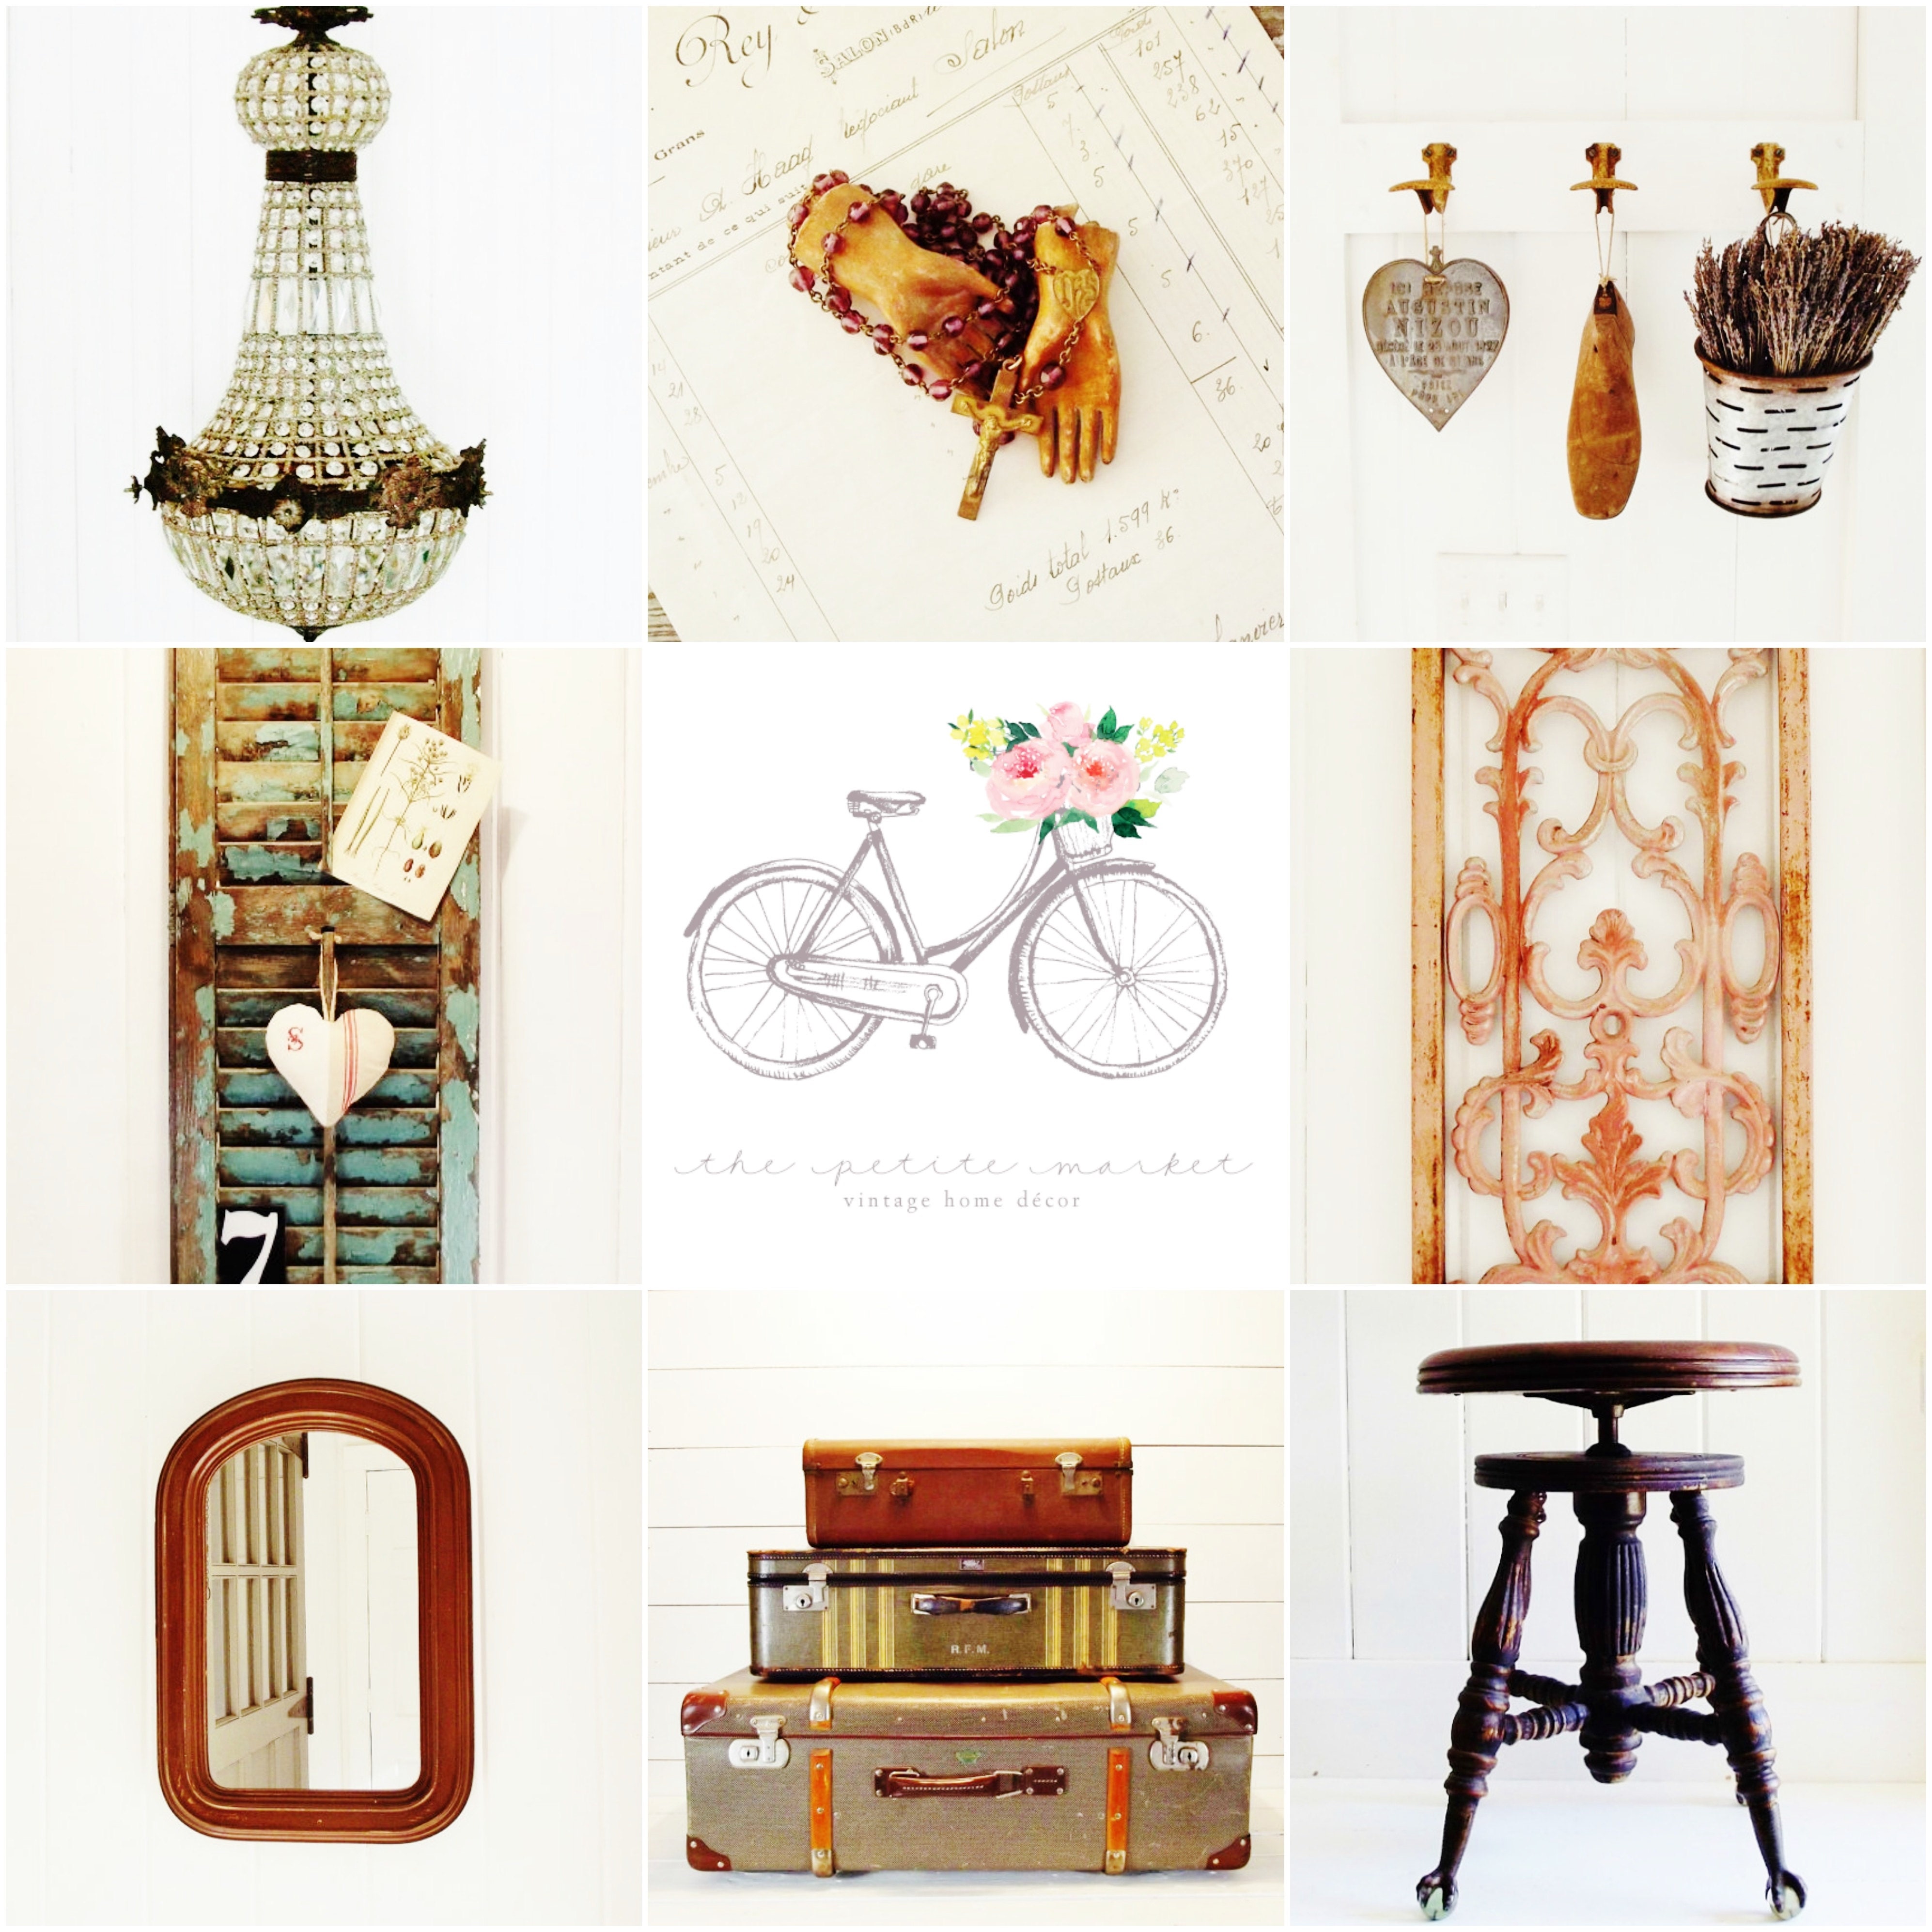 Vintage home decor by thepetitemarket on Etsy